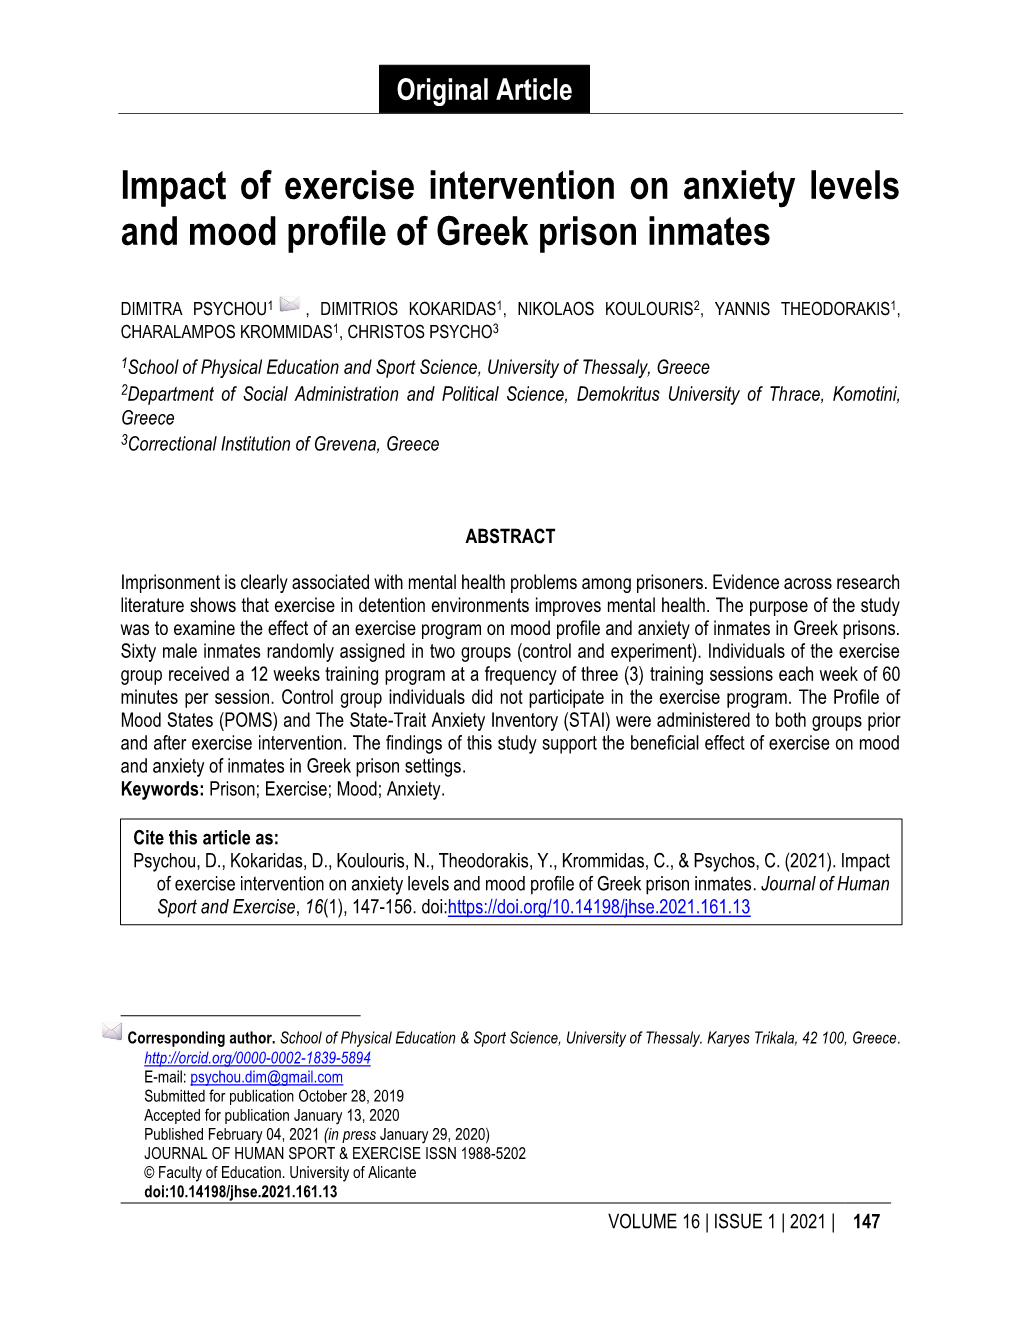 Impact of Exercise Intervention on Anxiety Levels and Mood Profile of Greek Prison Inmates